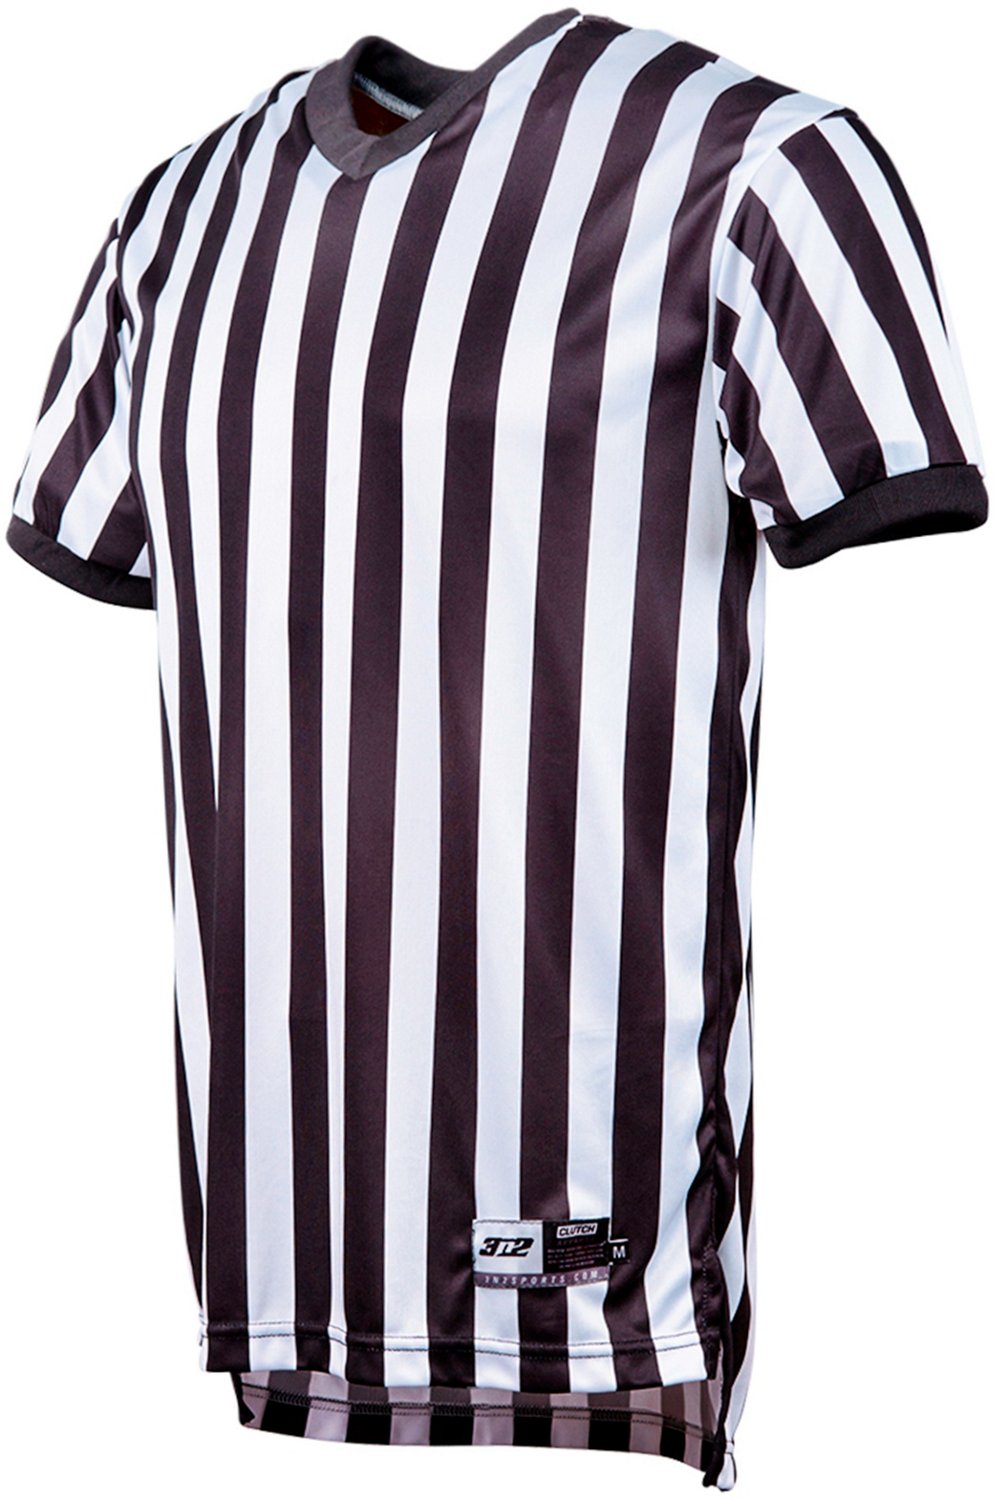 Search Results - Referee shirts | Academy